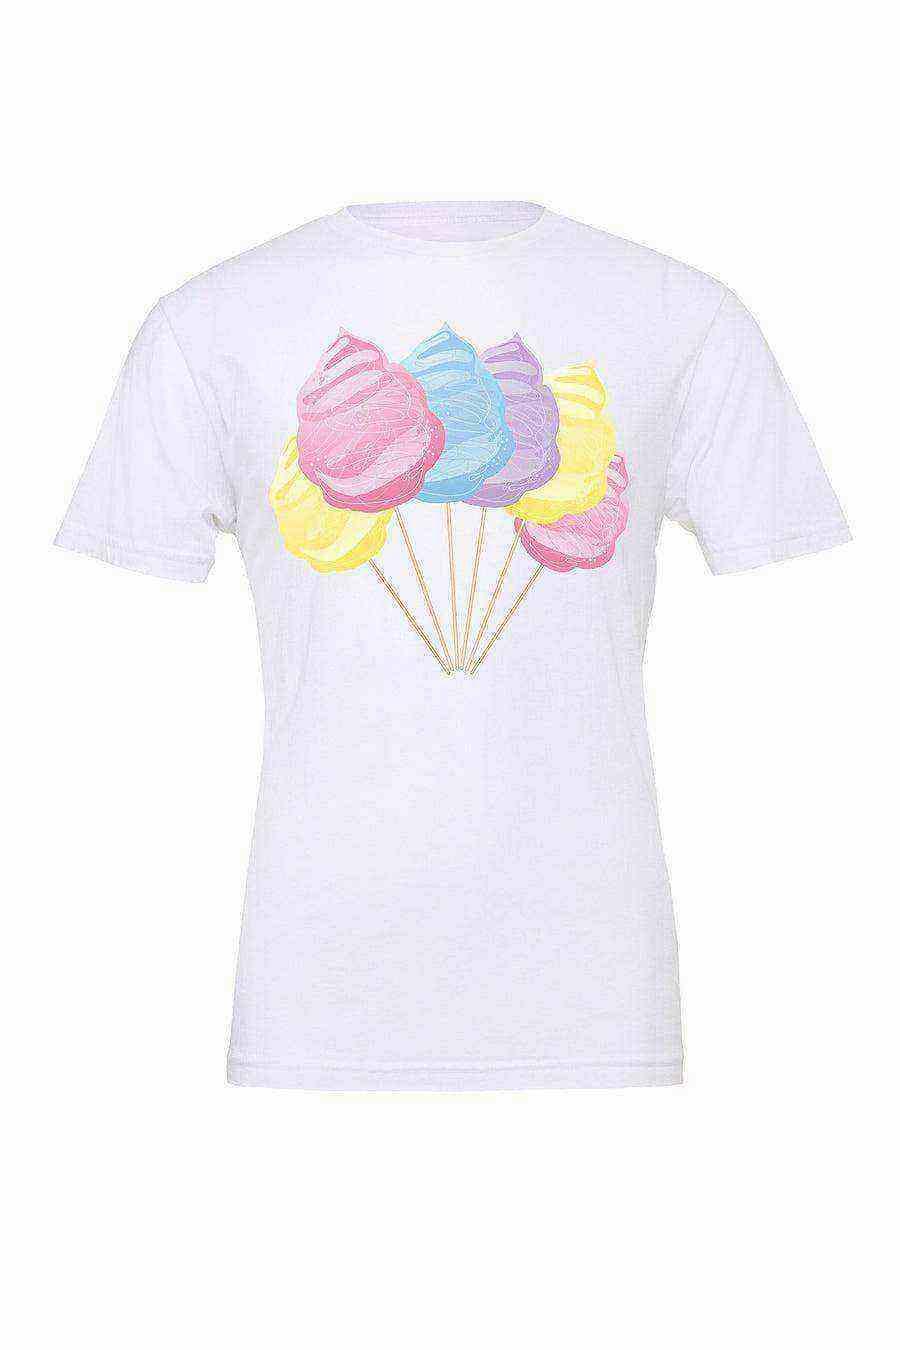 Youth | Cotton Candy Shirt | Cotton Candy | Summer Shirt - Dylan's Tees